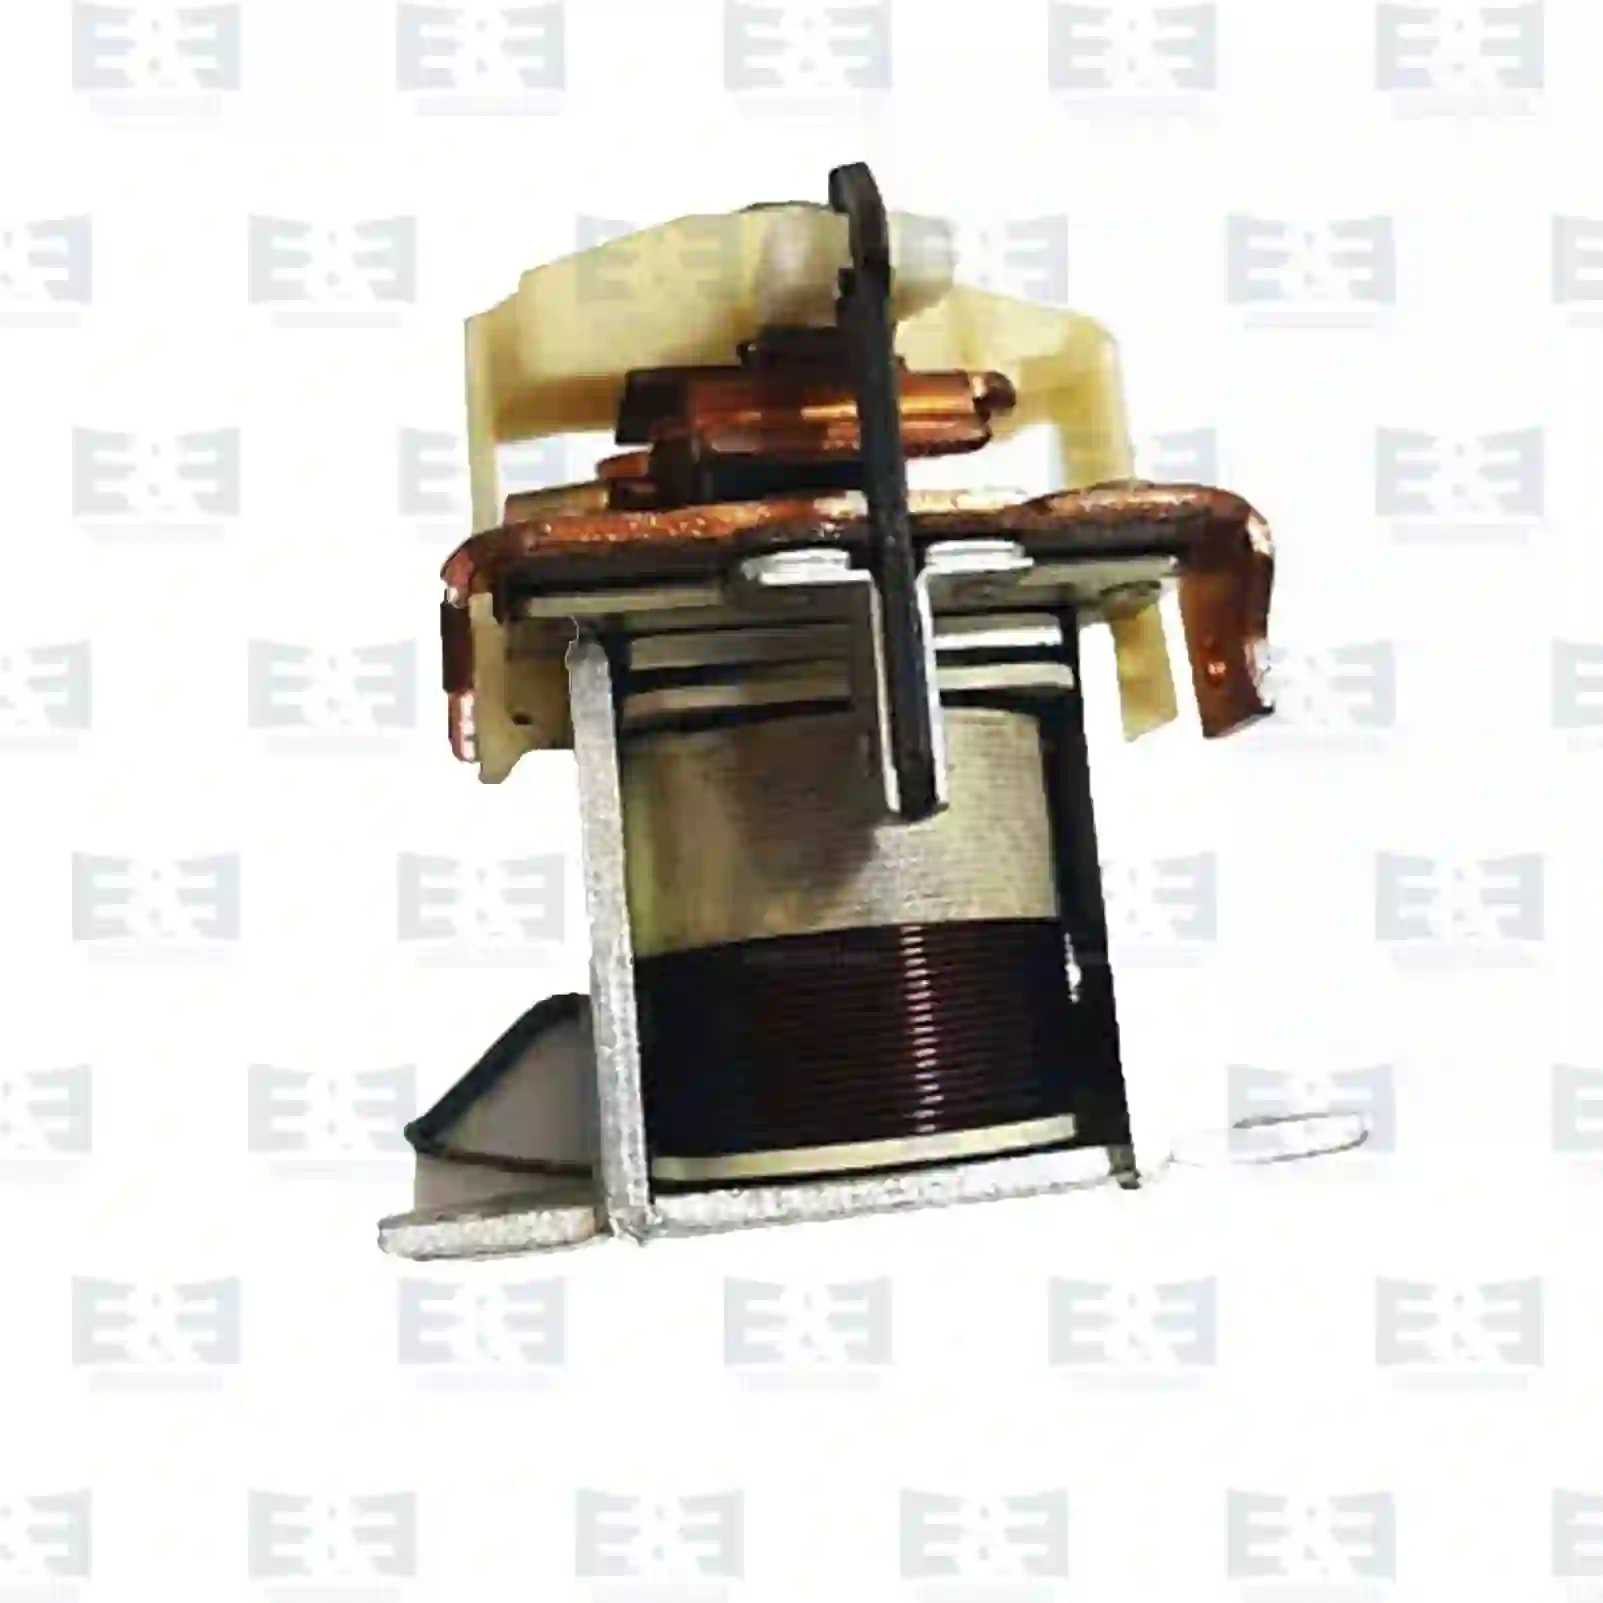 Starter Motor Solenoid switch, EE No 2E2290966 ,  oem no:2Y-2398, 0252121, 25212, 252121, 08122156, 4792460, 00992070, 08122156, 09920700, 61653567, 61654784, 75207433, 79052266, 79850018, 81221560, 82274433, 1614545, 6107233, 82DB-11450-AA, 82DB-11K134-AA, W841889, 460351, 79052266, 01298826, 00992070, 79052266, 79850018, 852274433, 81221560, 82274433, 610712308, 81262120012, 81262120028, 0001524210, 0011528810, 008001740003, 905720308021, W0841889, 7701004961, 296190752, 7701004961, 210995, 7701004961, 61500090723, 009920700, 061653567, 061654784, 240493, 7240493, ZG20915-0008 E&E Truck Spare Parts | Truck Spare Parts, Auotomotive Spare Parts